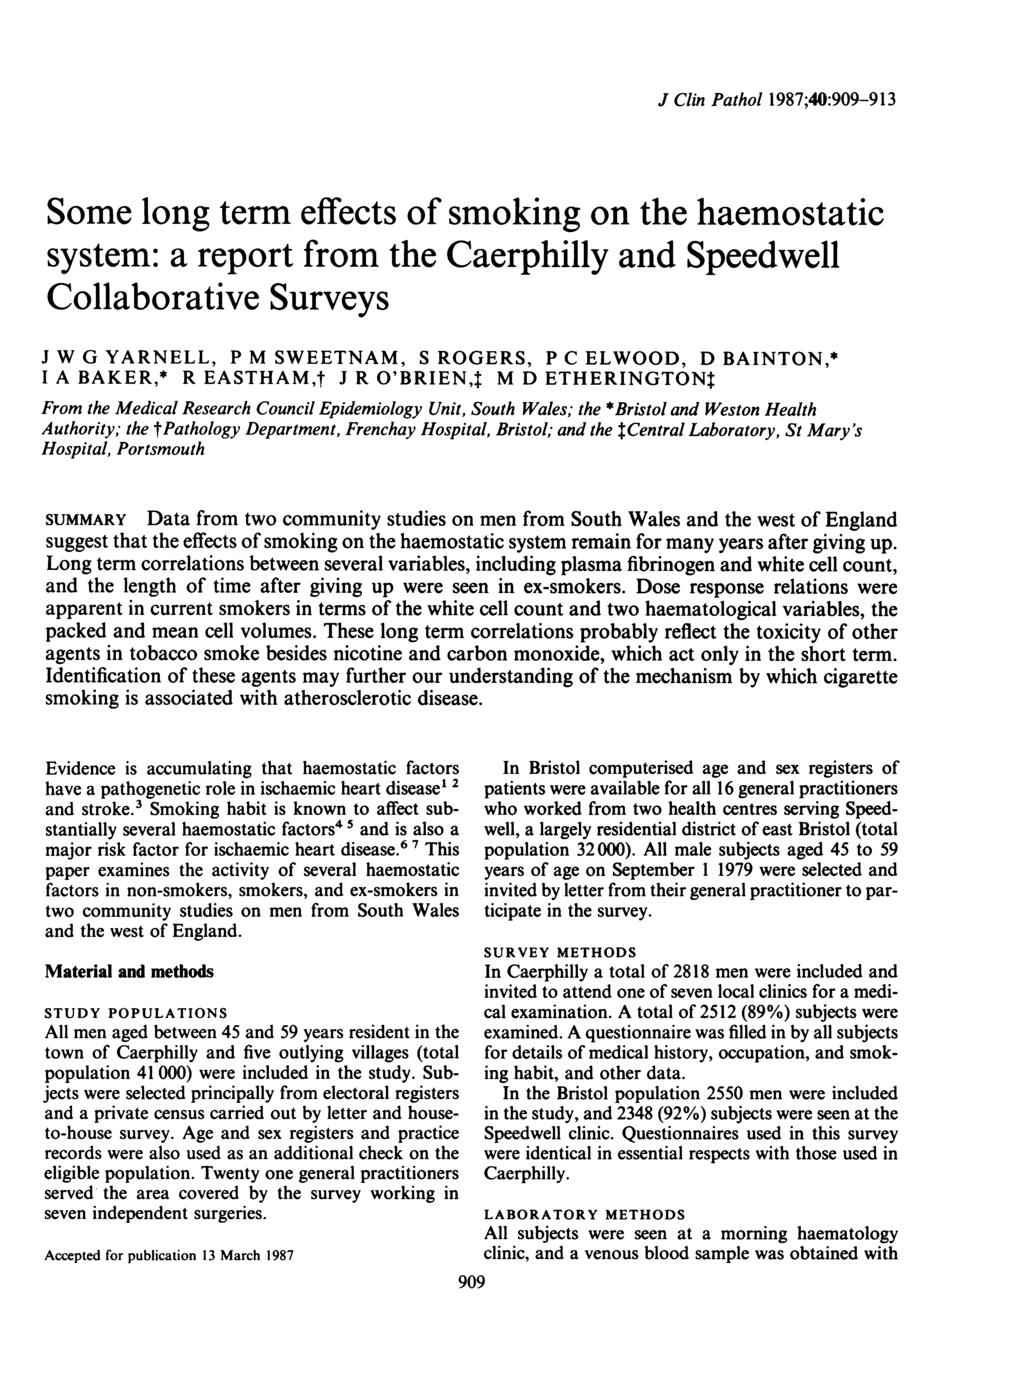 J Clin Pathol 1987;40:909-913 Some long term effects of smoking on the haemostatic system: a report from the Caerphilly and Speedwell Collaborative Surveys J W G YARNELL, P M SWEETNAM, S ROGERS, P C